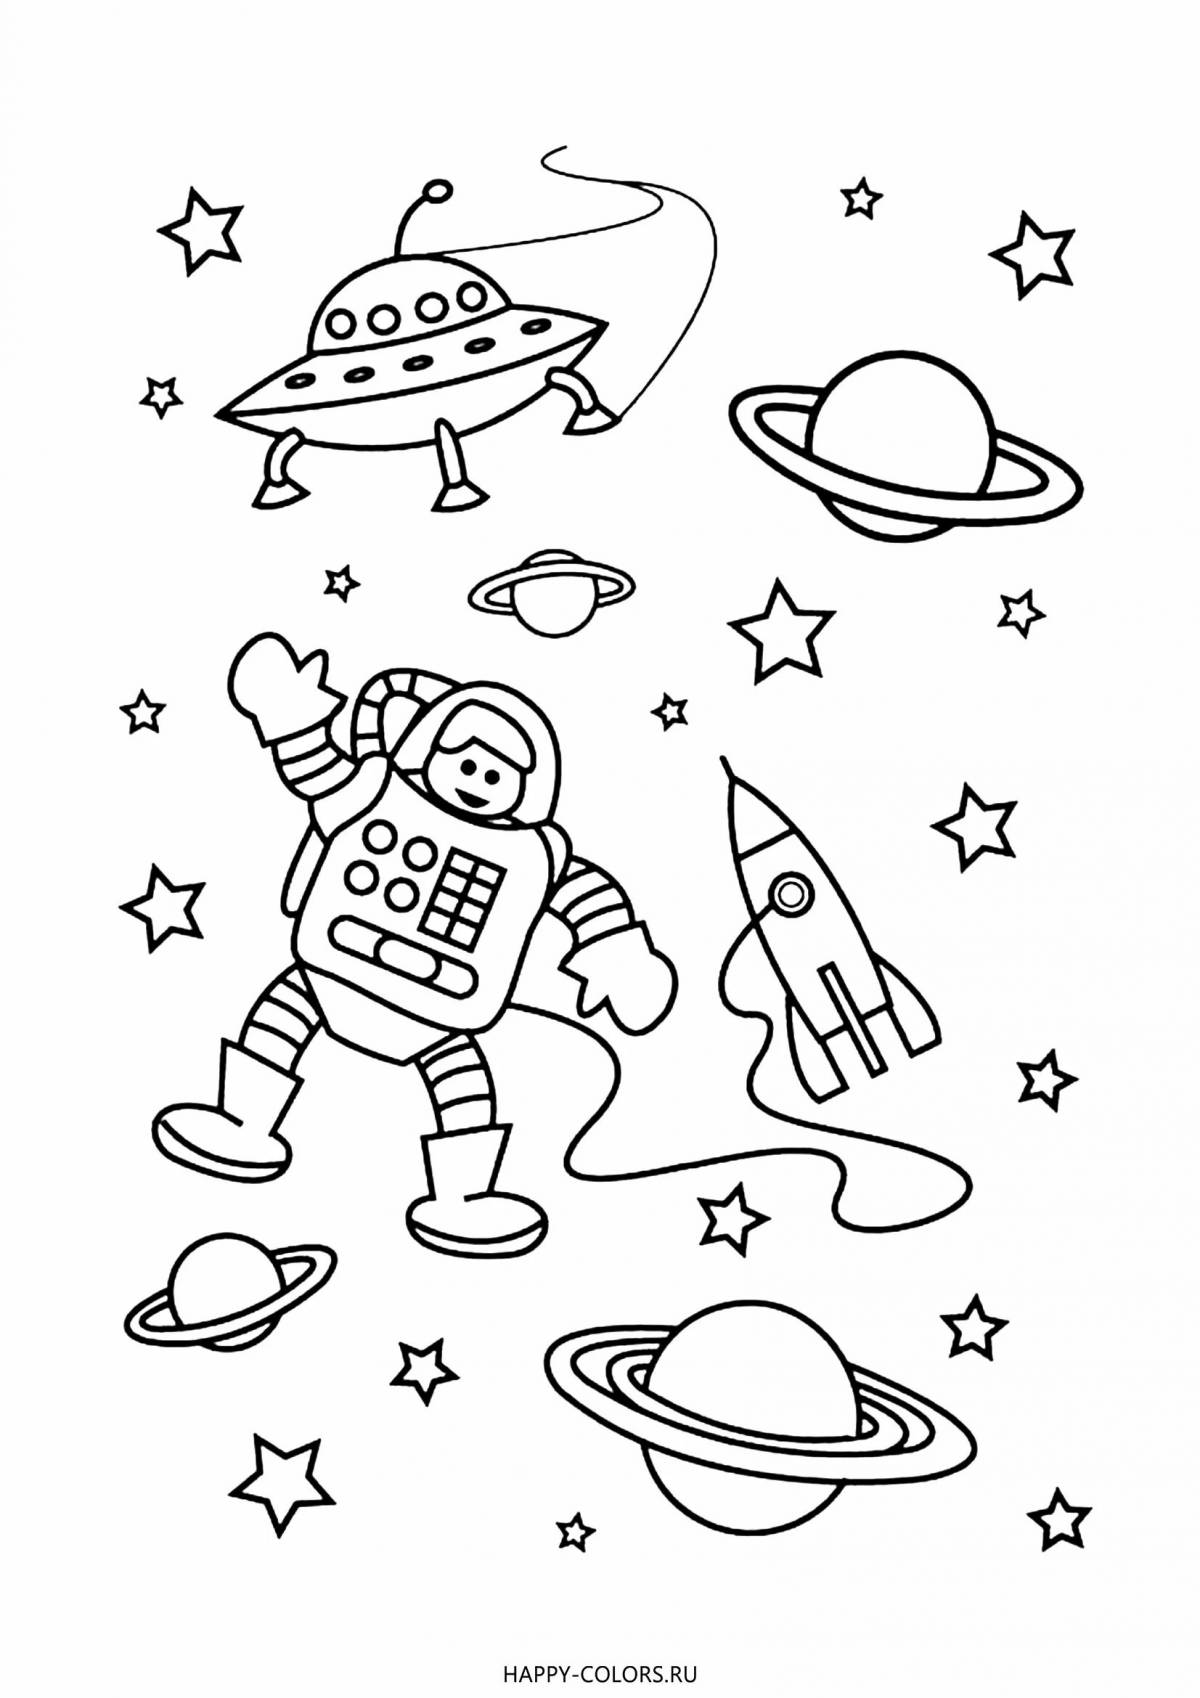 Outstanding space coloring book for 4-5 year olds